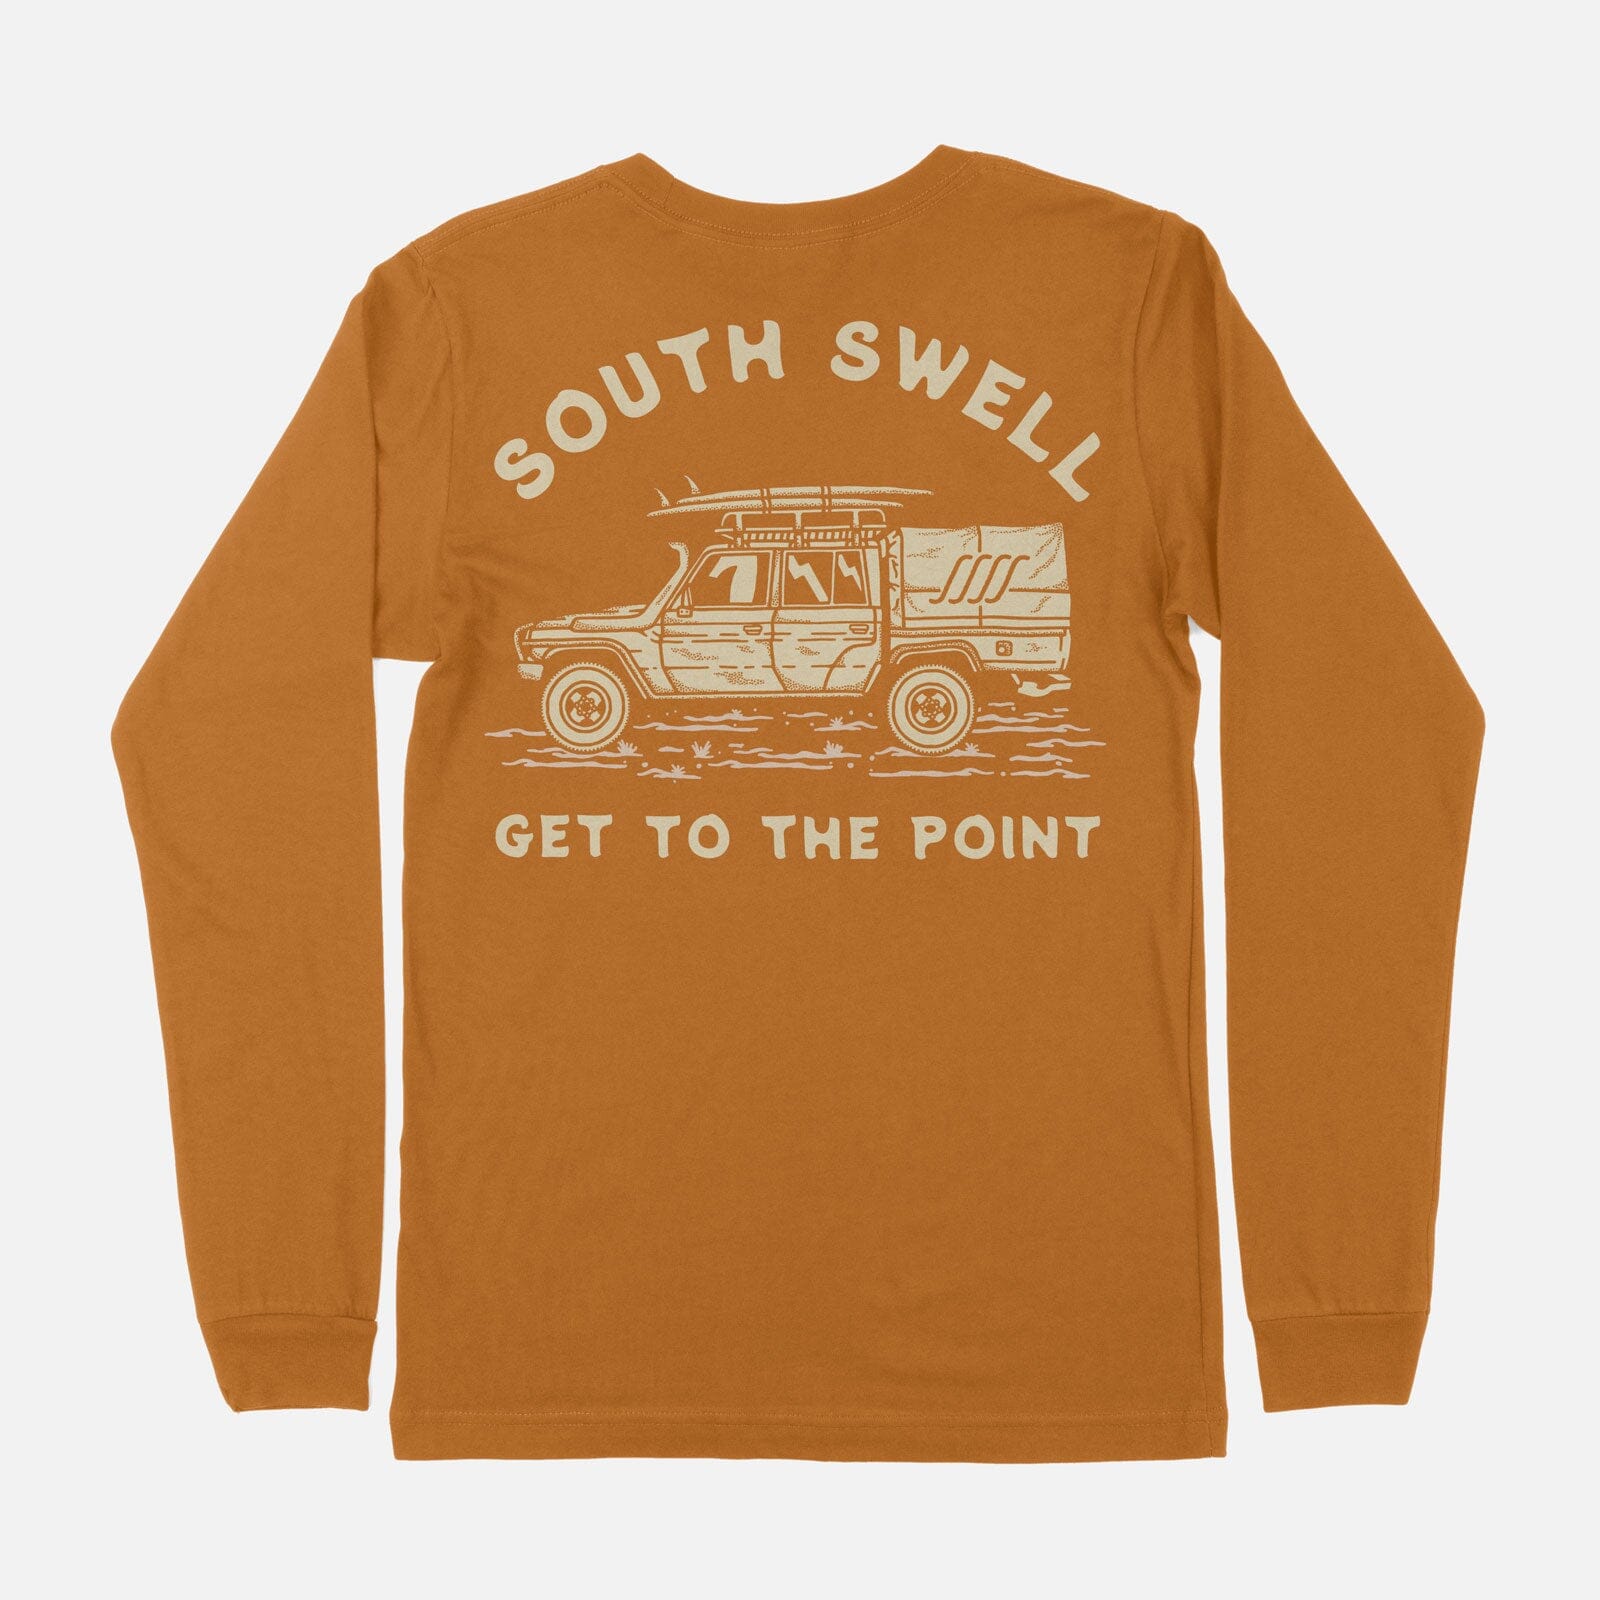 South Swell Get To The Point Longsleeve M Longsleeve Tee SOUTH SWELL S Toast 